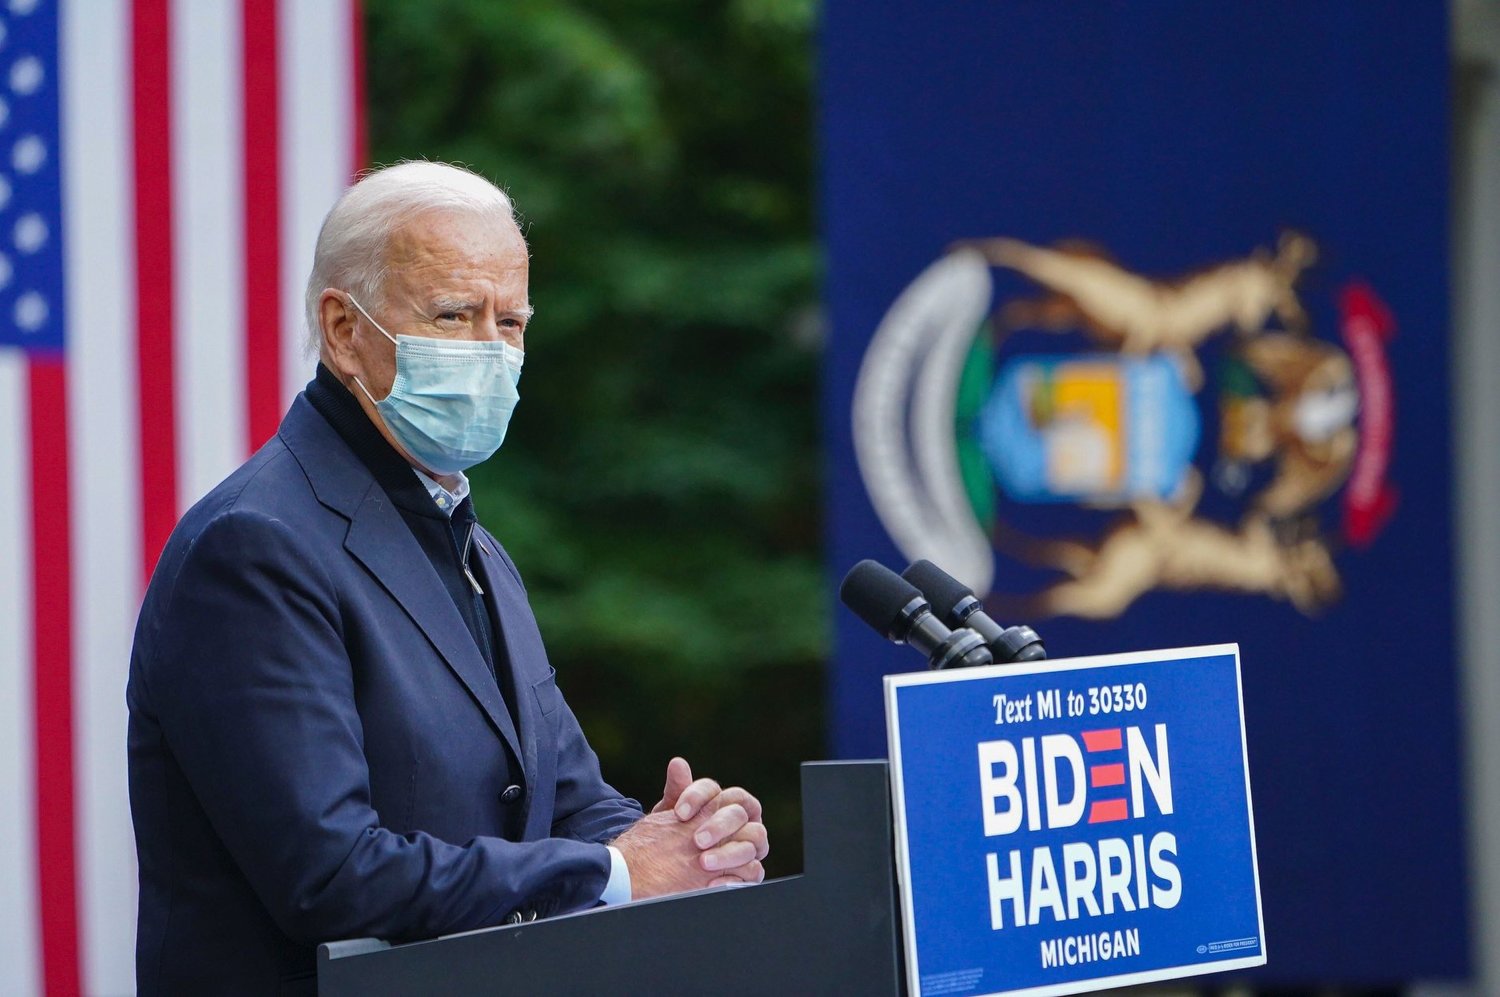 Biden's health has been repeatedly questioned, and it can be seen in a comparison video posted by Trump's po a few days ago that Biden's condition is much worse than before.Image: Retrieved from Biden's Facebook